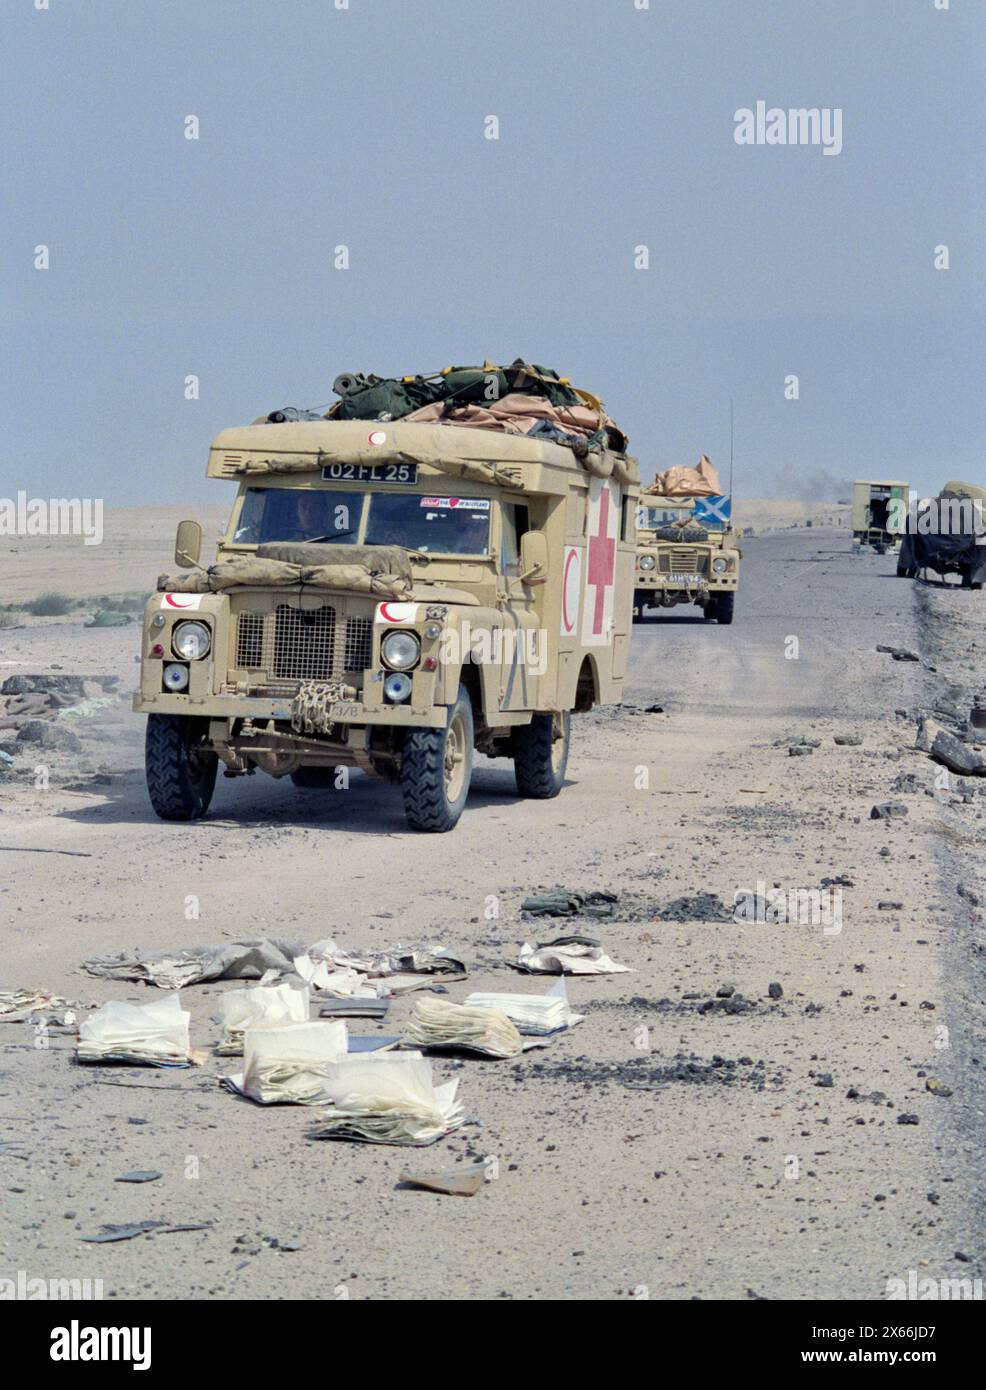 5th March 1991 Two British Army Land Rovers of the King's Own Scottish Borderers pass Iraqi military vehicles abandoned and wrecked, recently attacked by USAF fighter jets on Route 801, the road to Um Qasr, north of Kuwait City. Stock Photo